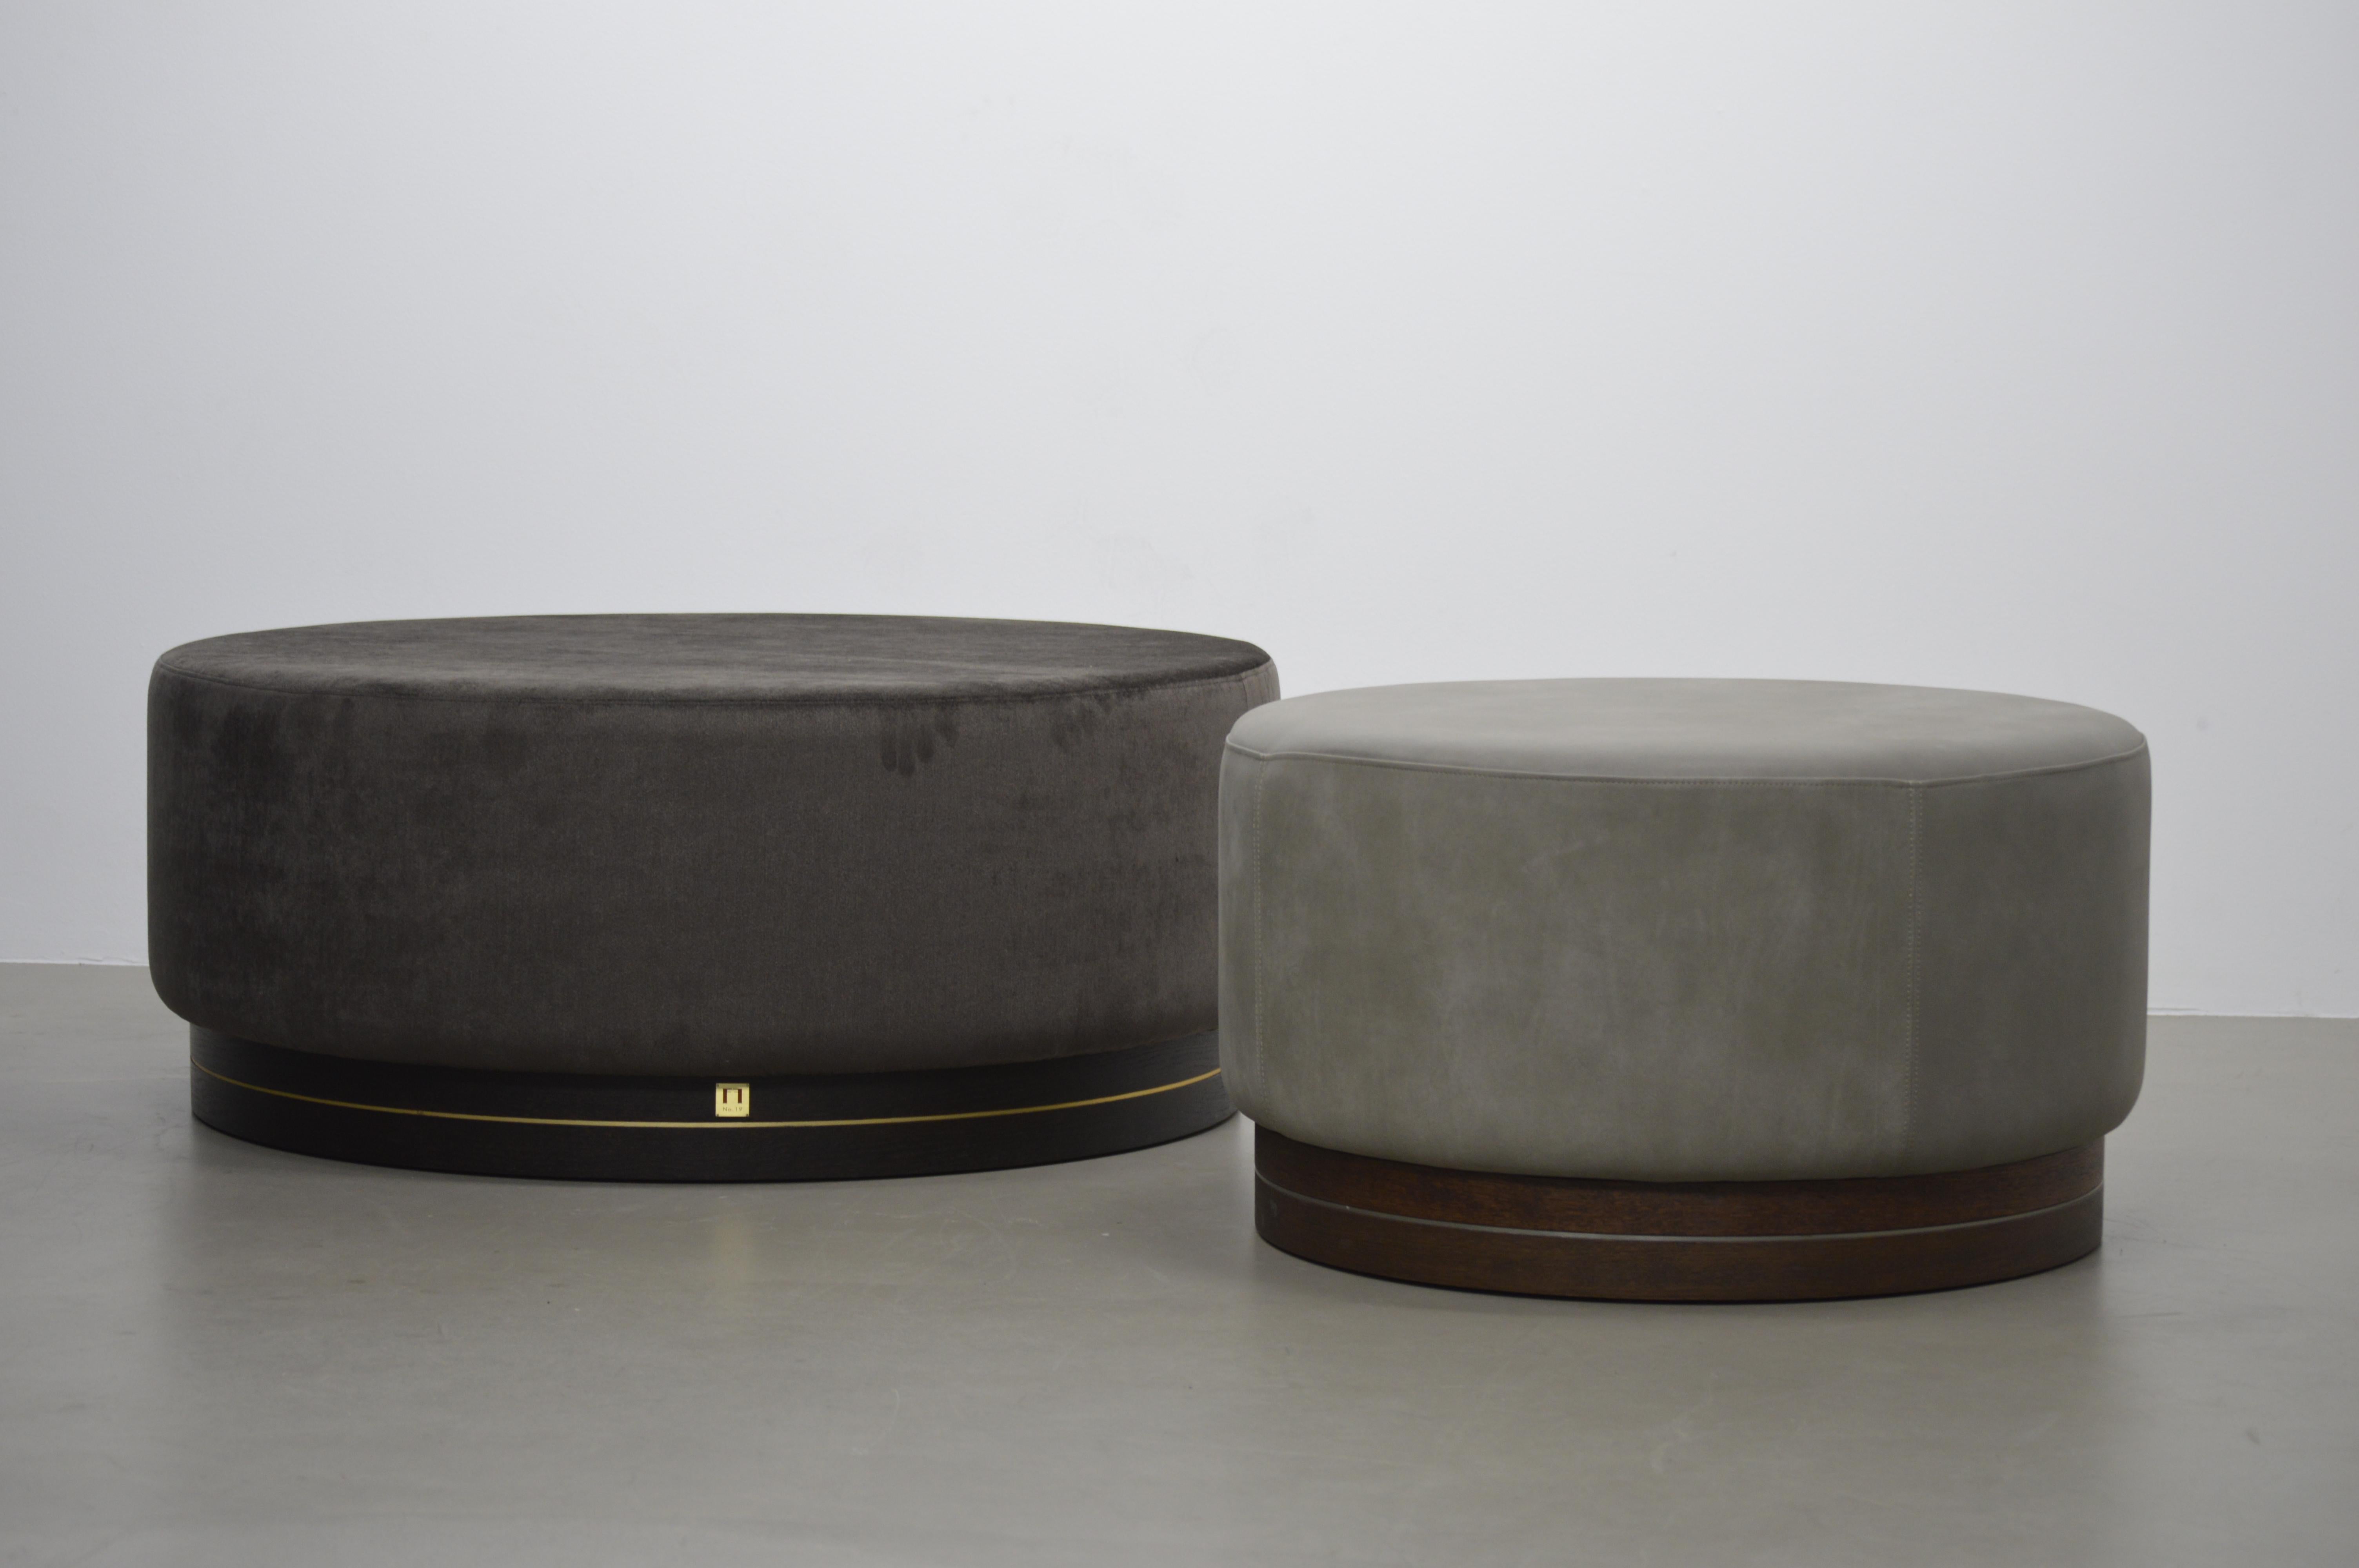 Modest in design yet solid in form, the handmade Il Fratello pouf is a modern interpretation of the classic pouf. With its sculptural presence and soft textures, the pouf combines art and functionality. The use of natural materials of high quality